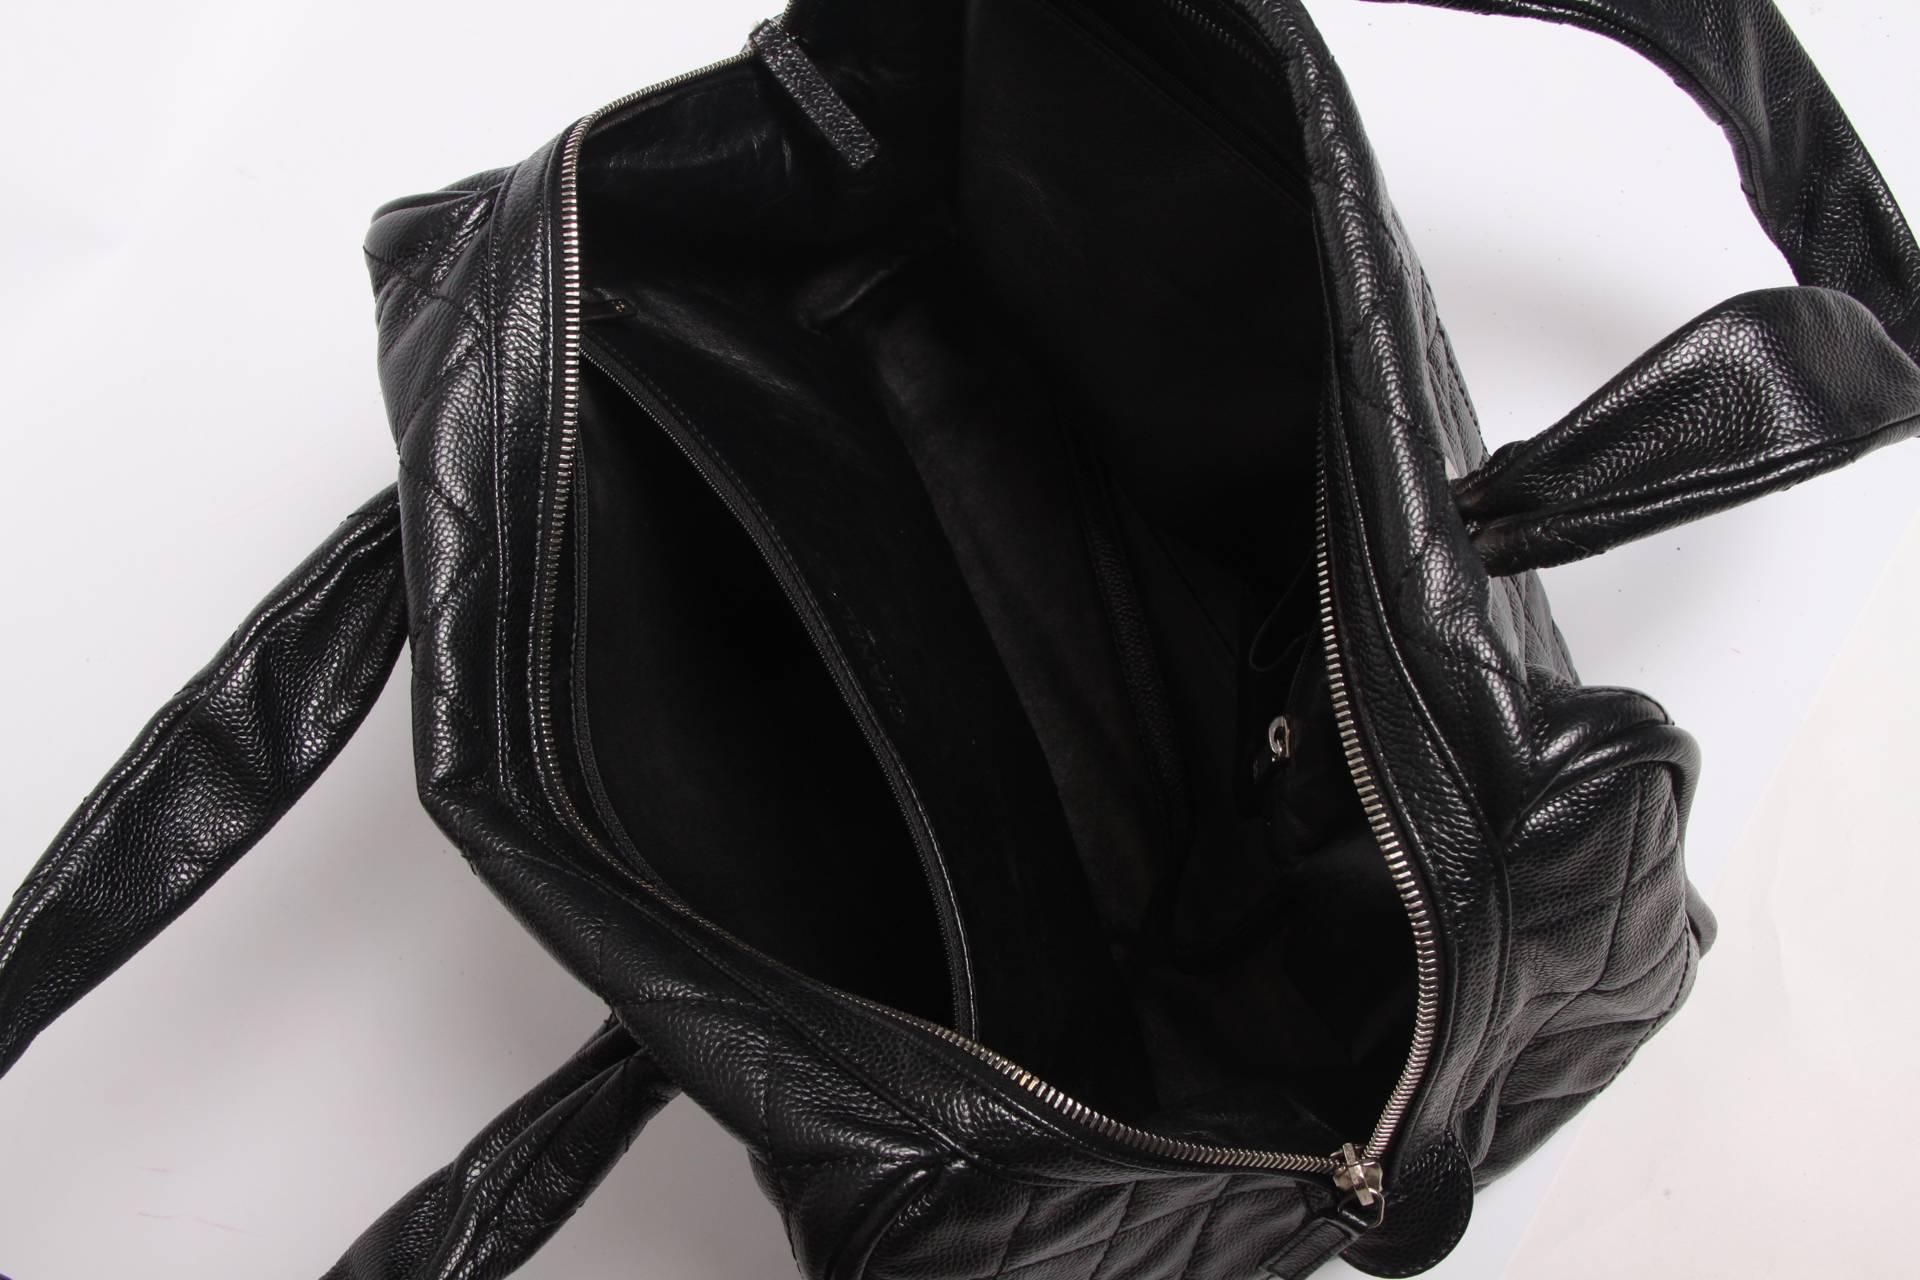 Chanel Top Handle Shopper Bag - black caviar leather  In Excellent Condition For Sale In Baarn, NL